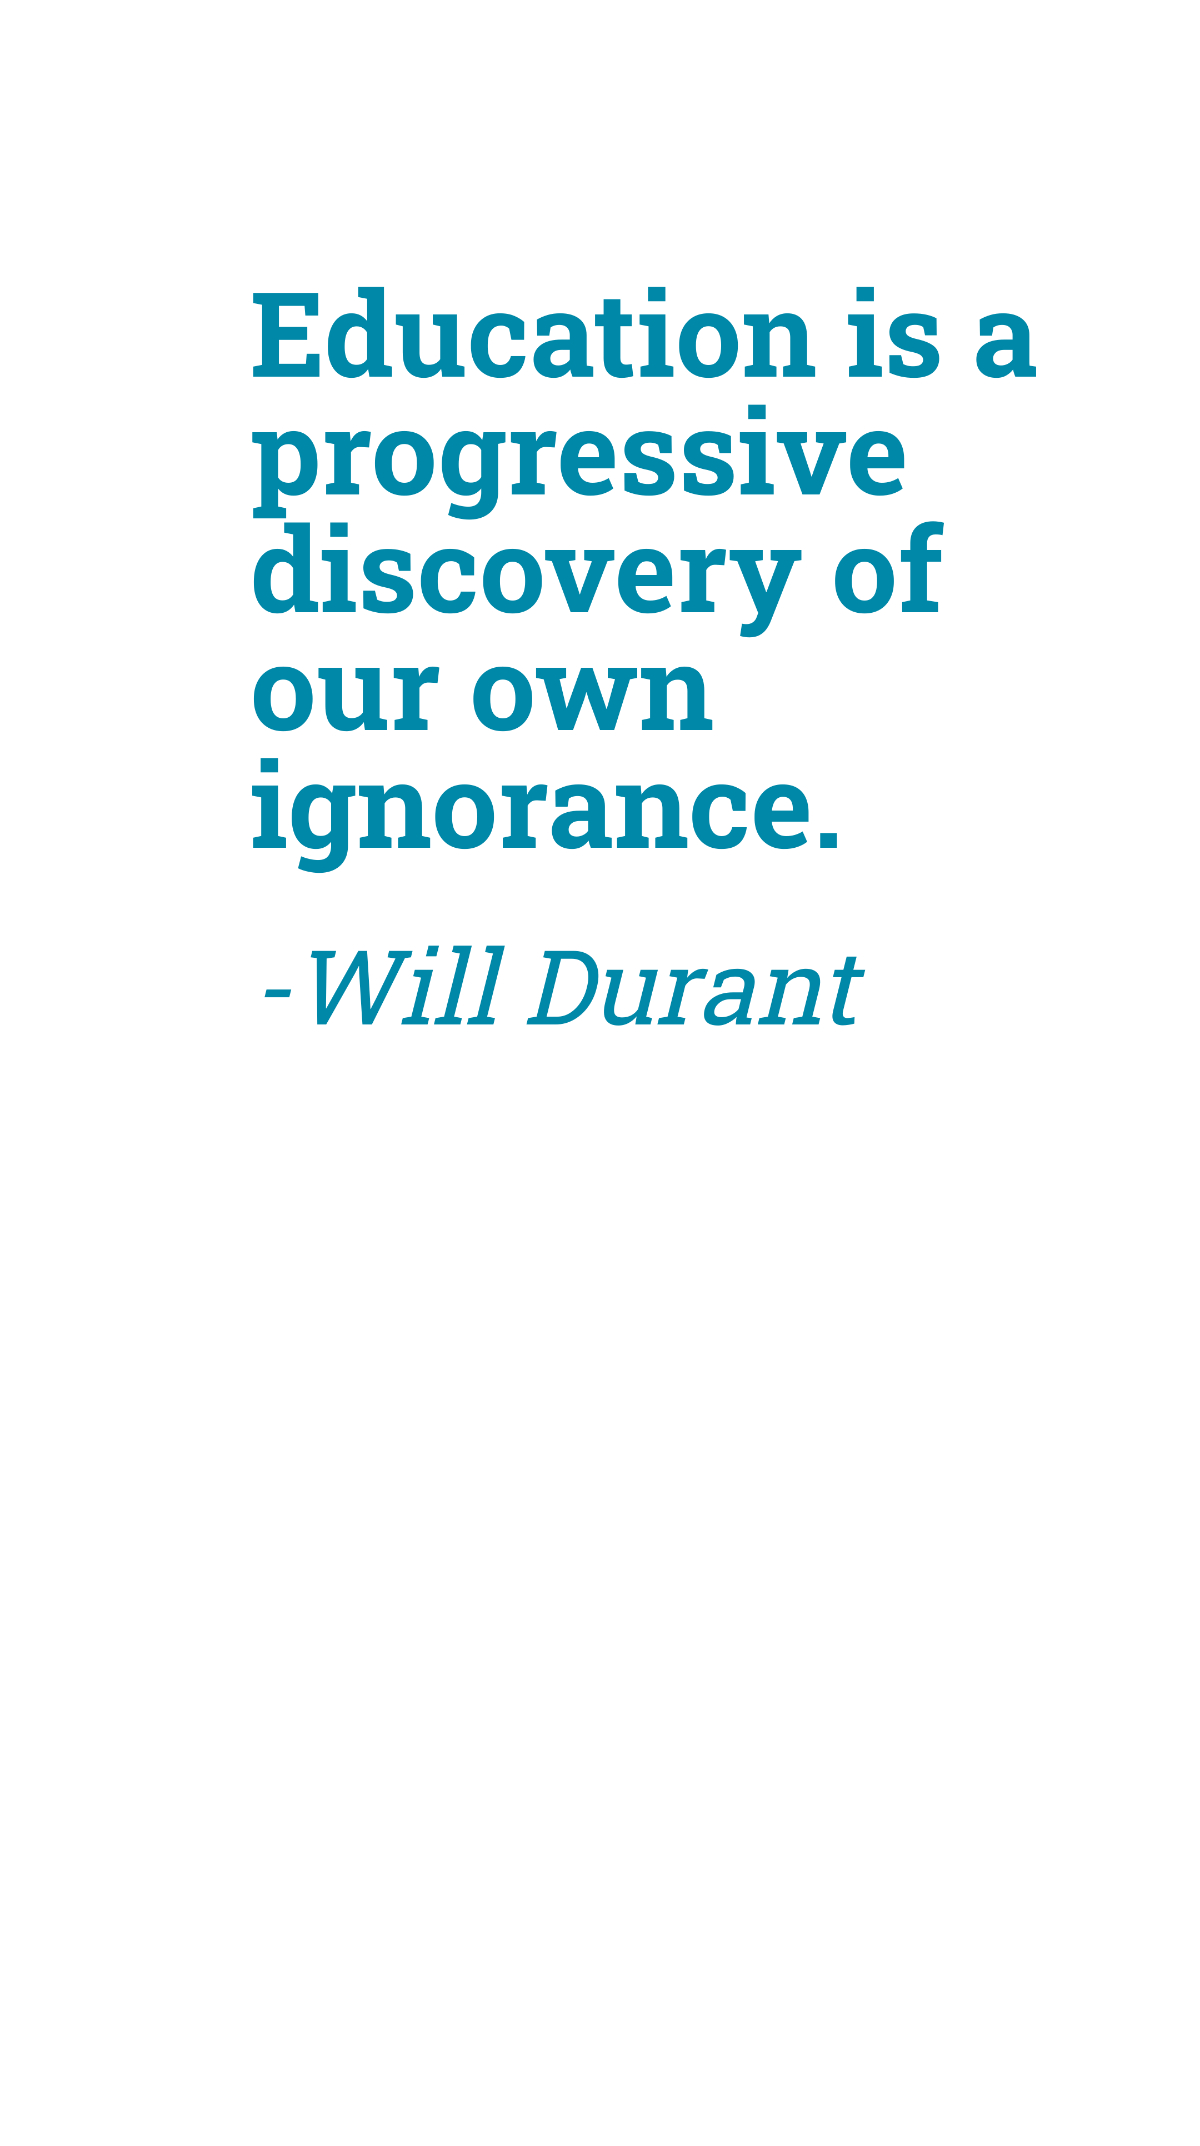 Will Durant - Education is a progressive discovery of our own ignorance. Template